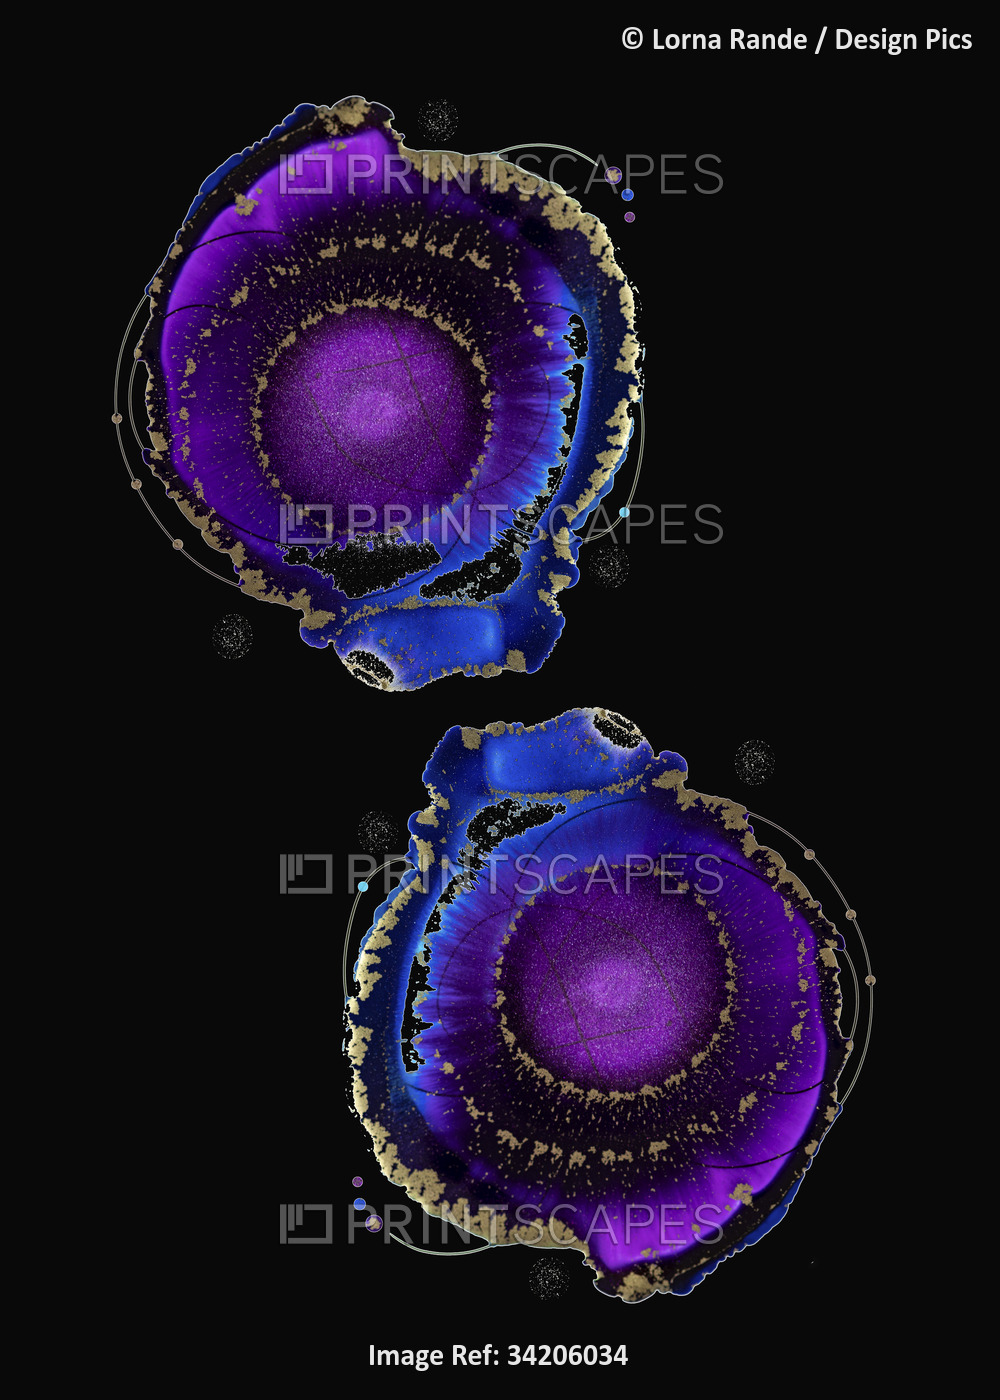 Two ink blot creations in purple, blue and black; Artwork